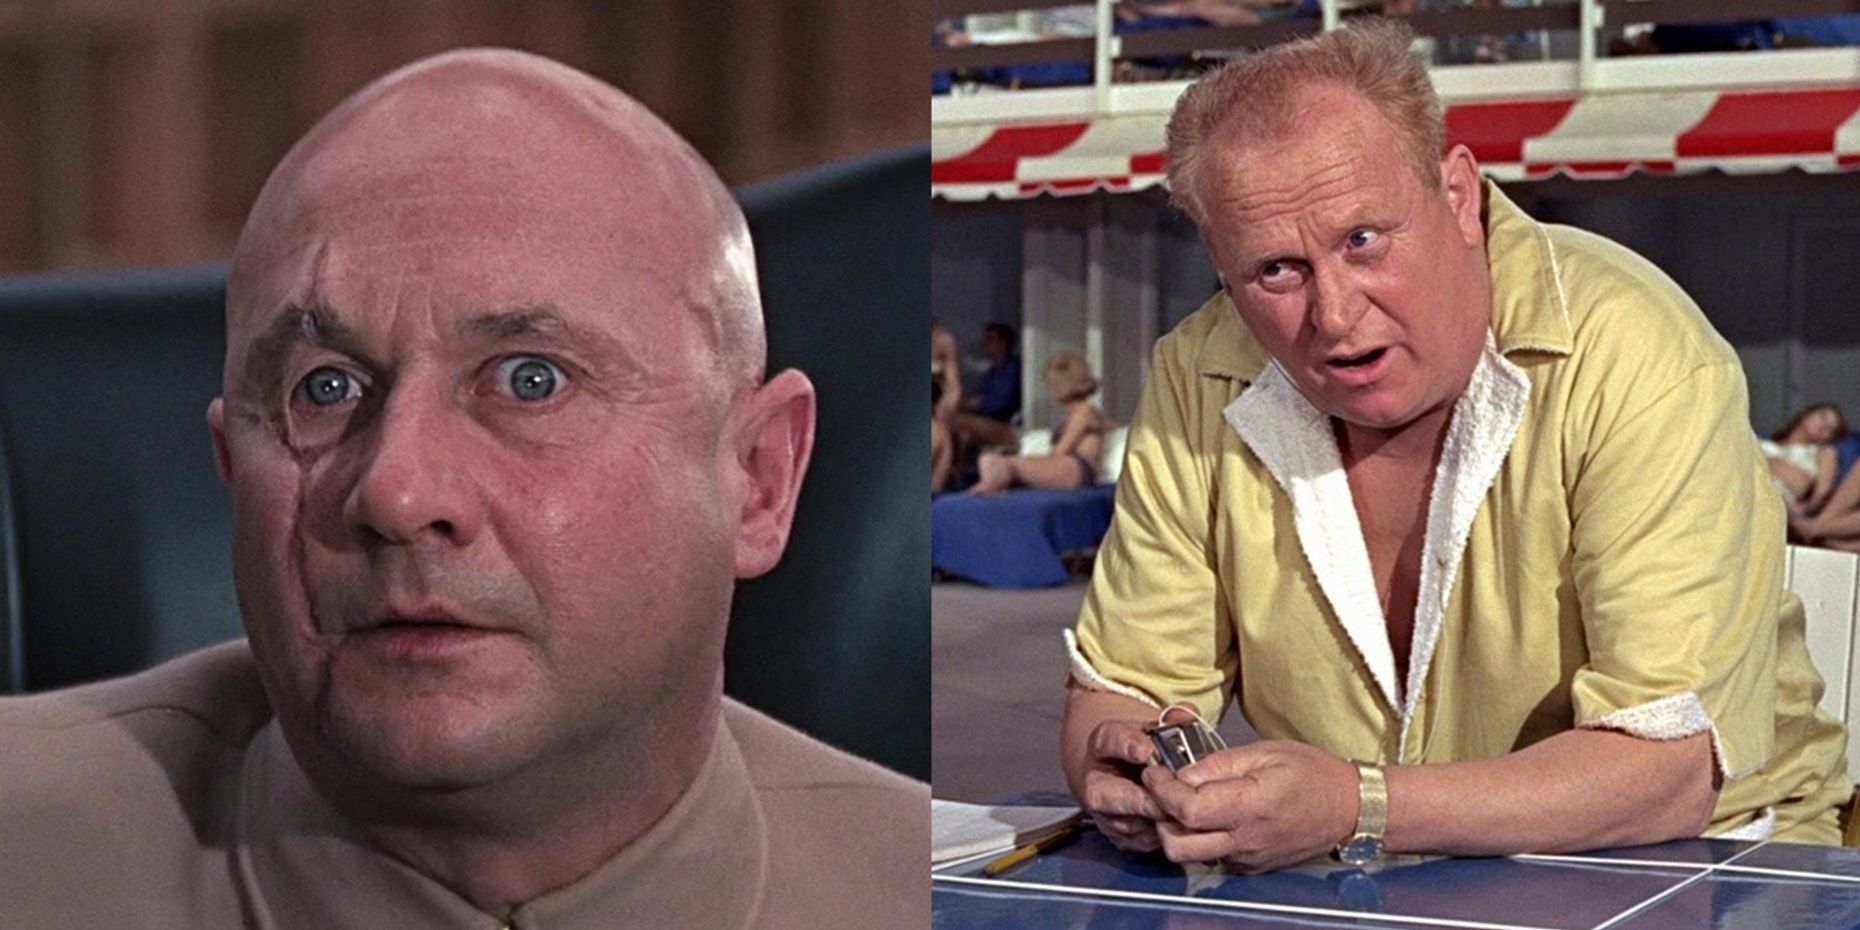 Blofeld and Goldfinger from the James Bond movies